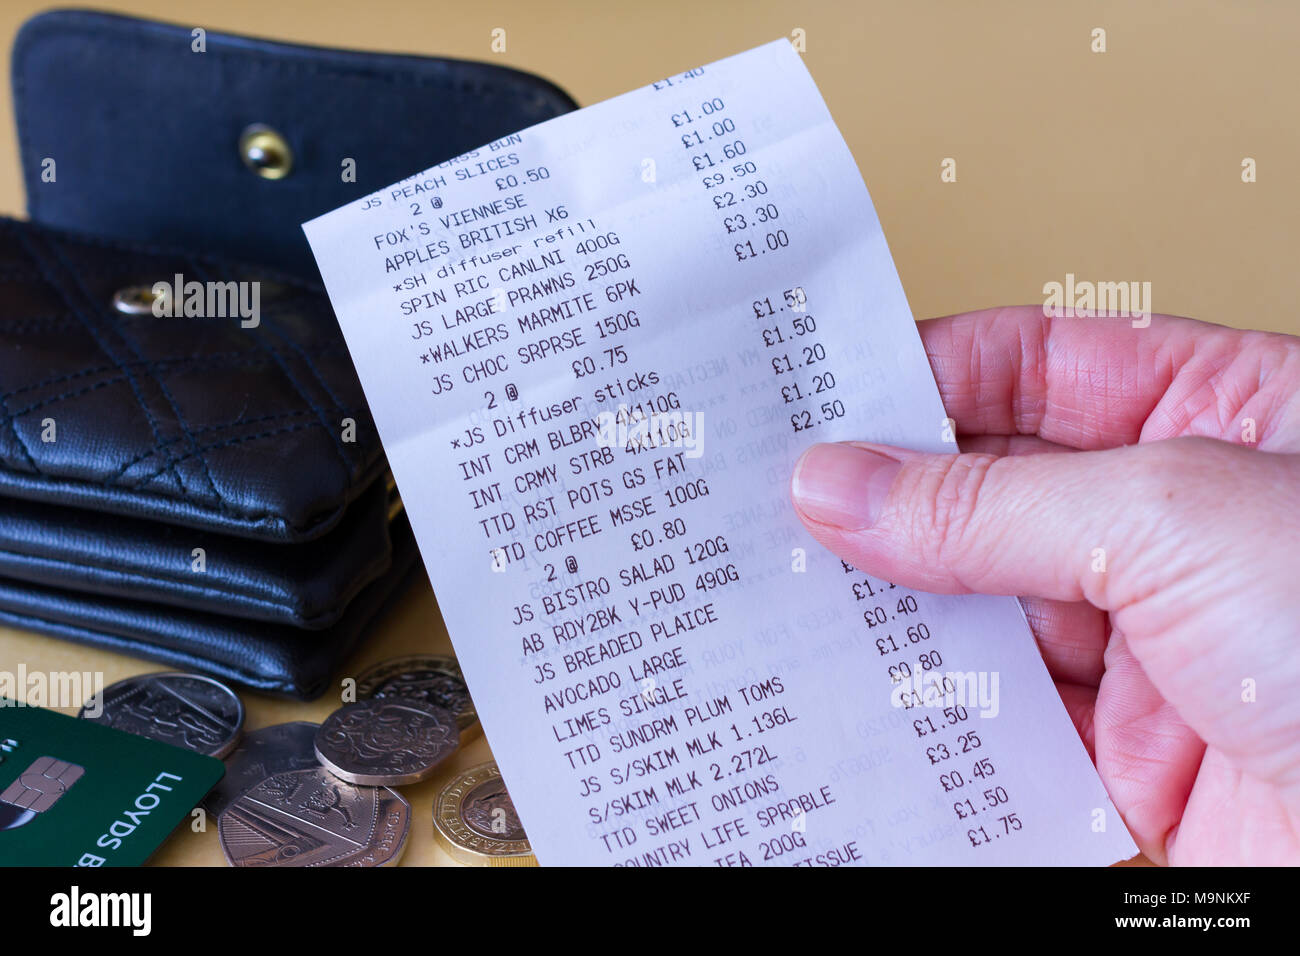 Female hand holding a supermarket grocery shopping till receipt with a purse, some coins & bank card in the background, United Kingdom Stock Photo